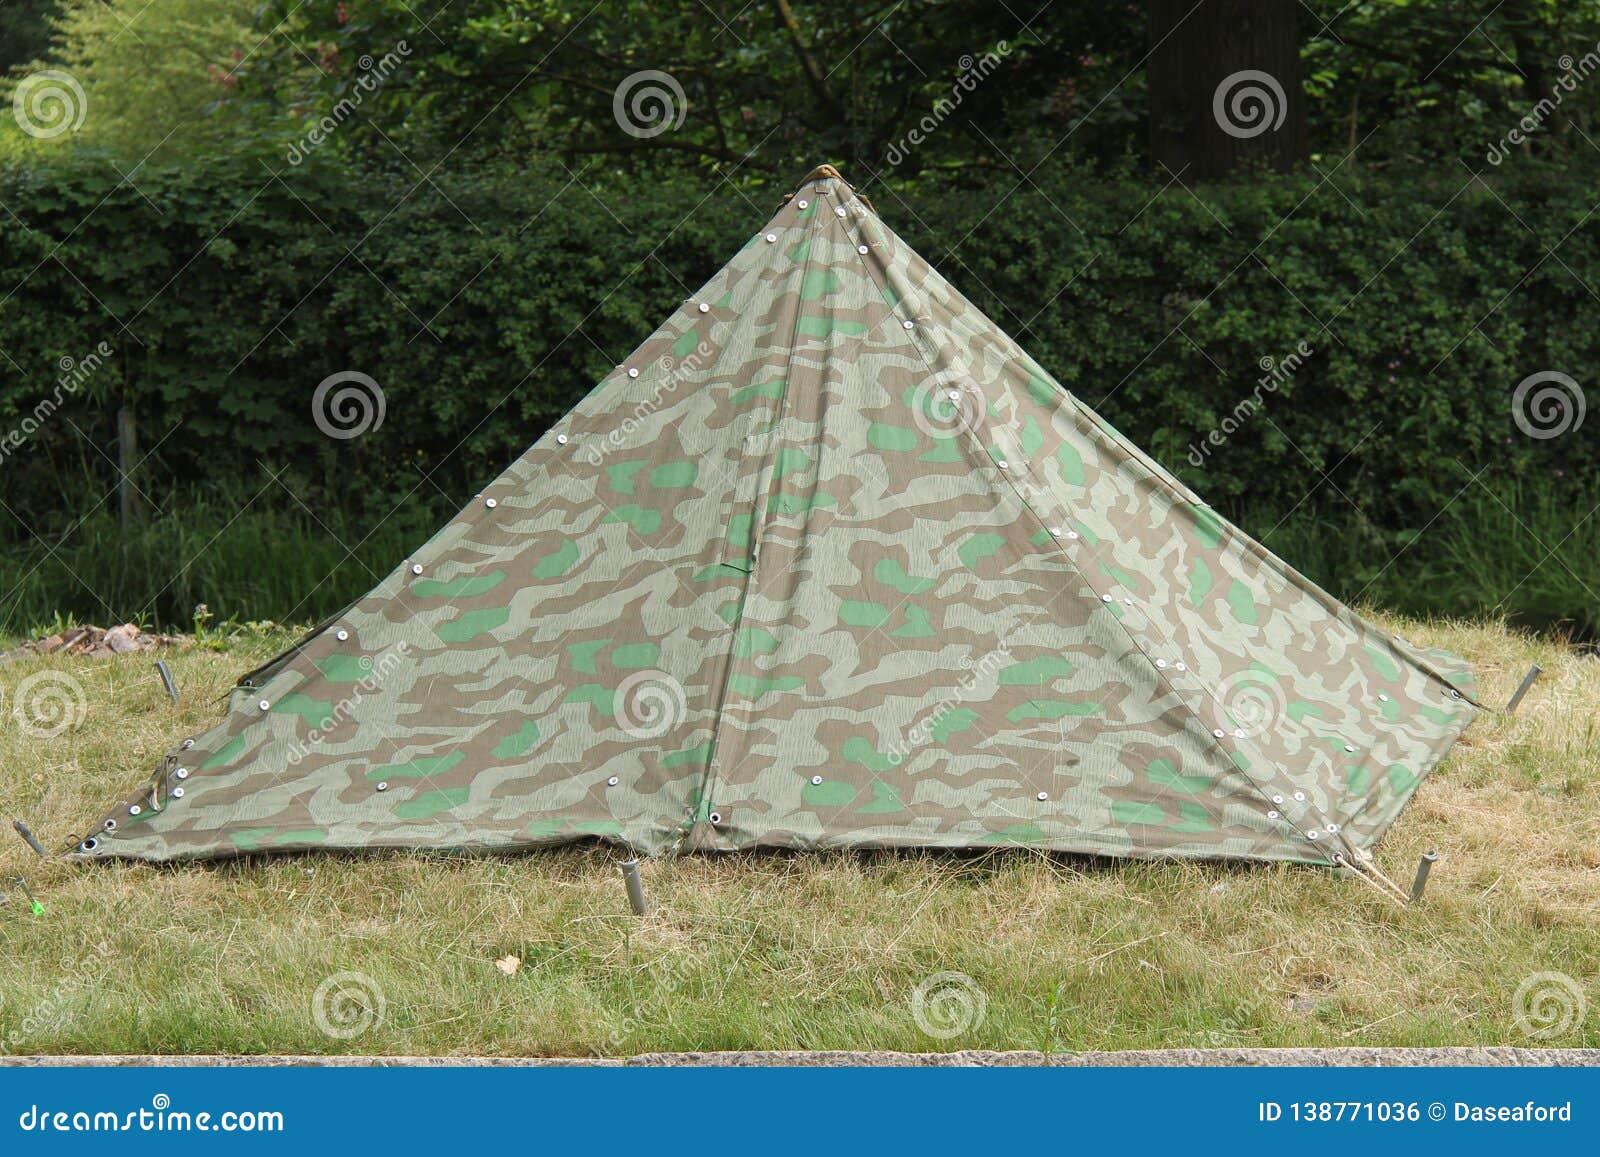 Military Canvas Tent. stock photo. Image of pegs, tent - 138771036